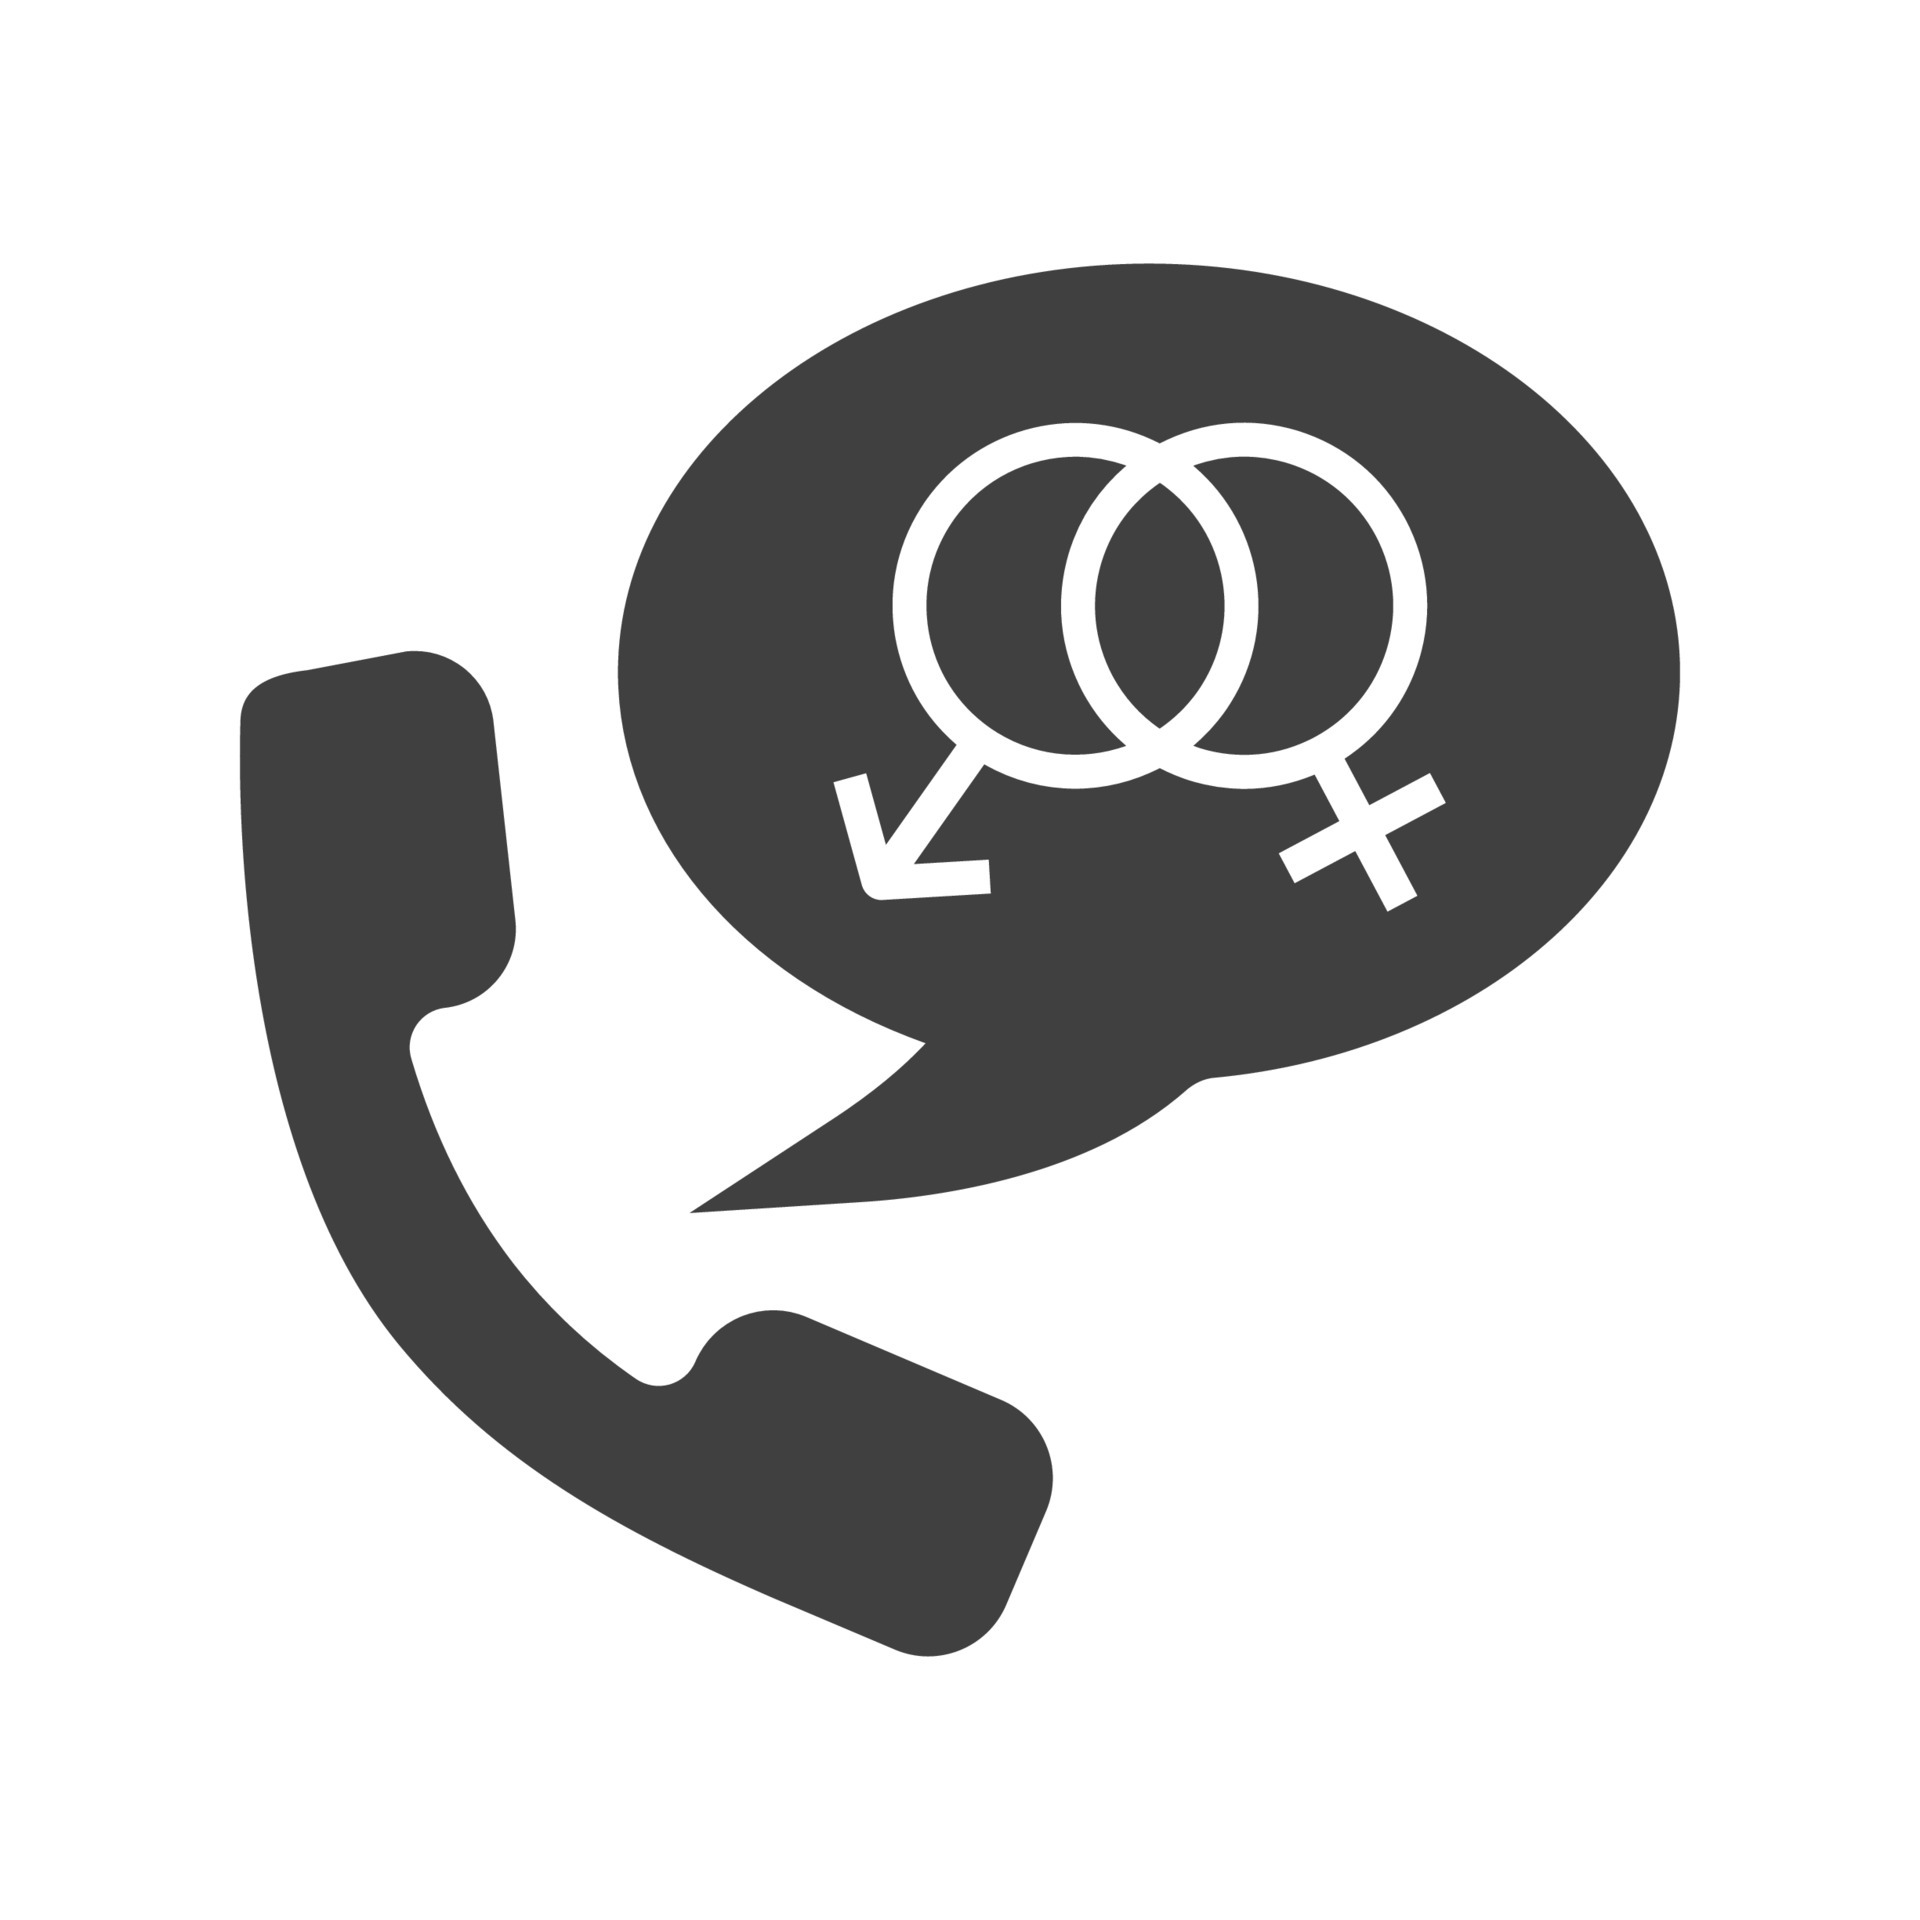 Phone sex glyph icon. Silhouette symbol. Handset with man and woman gender signs inside speech bubble